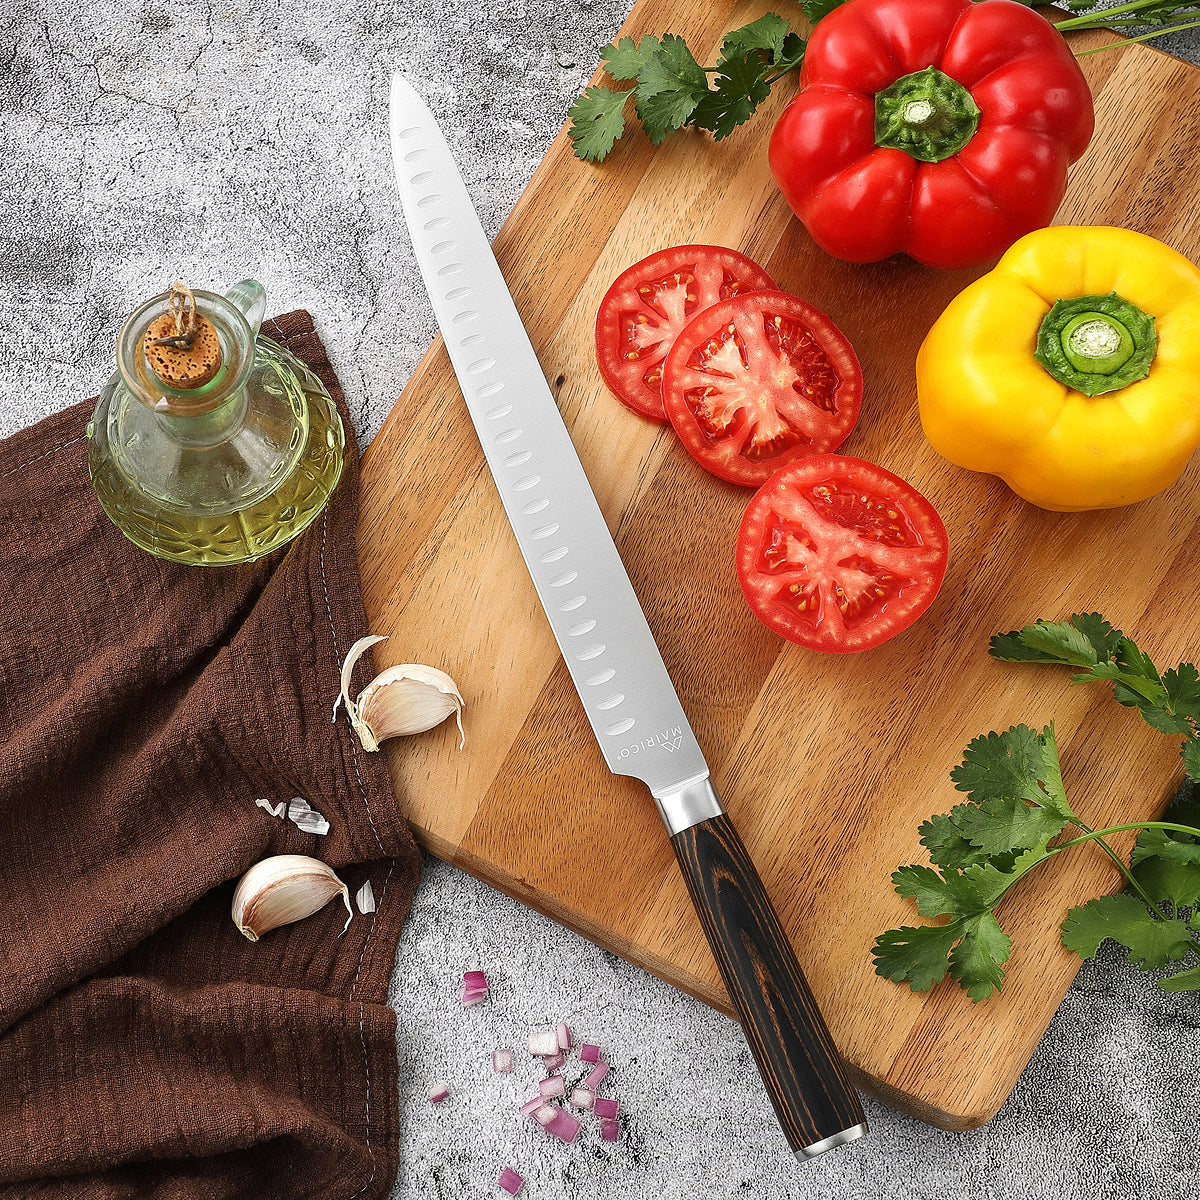 HOW TO CARE FOR SLICING KNIFE – MAIRICO